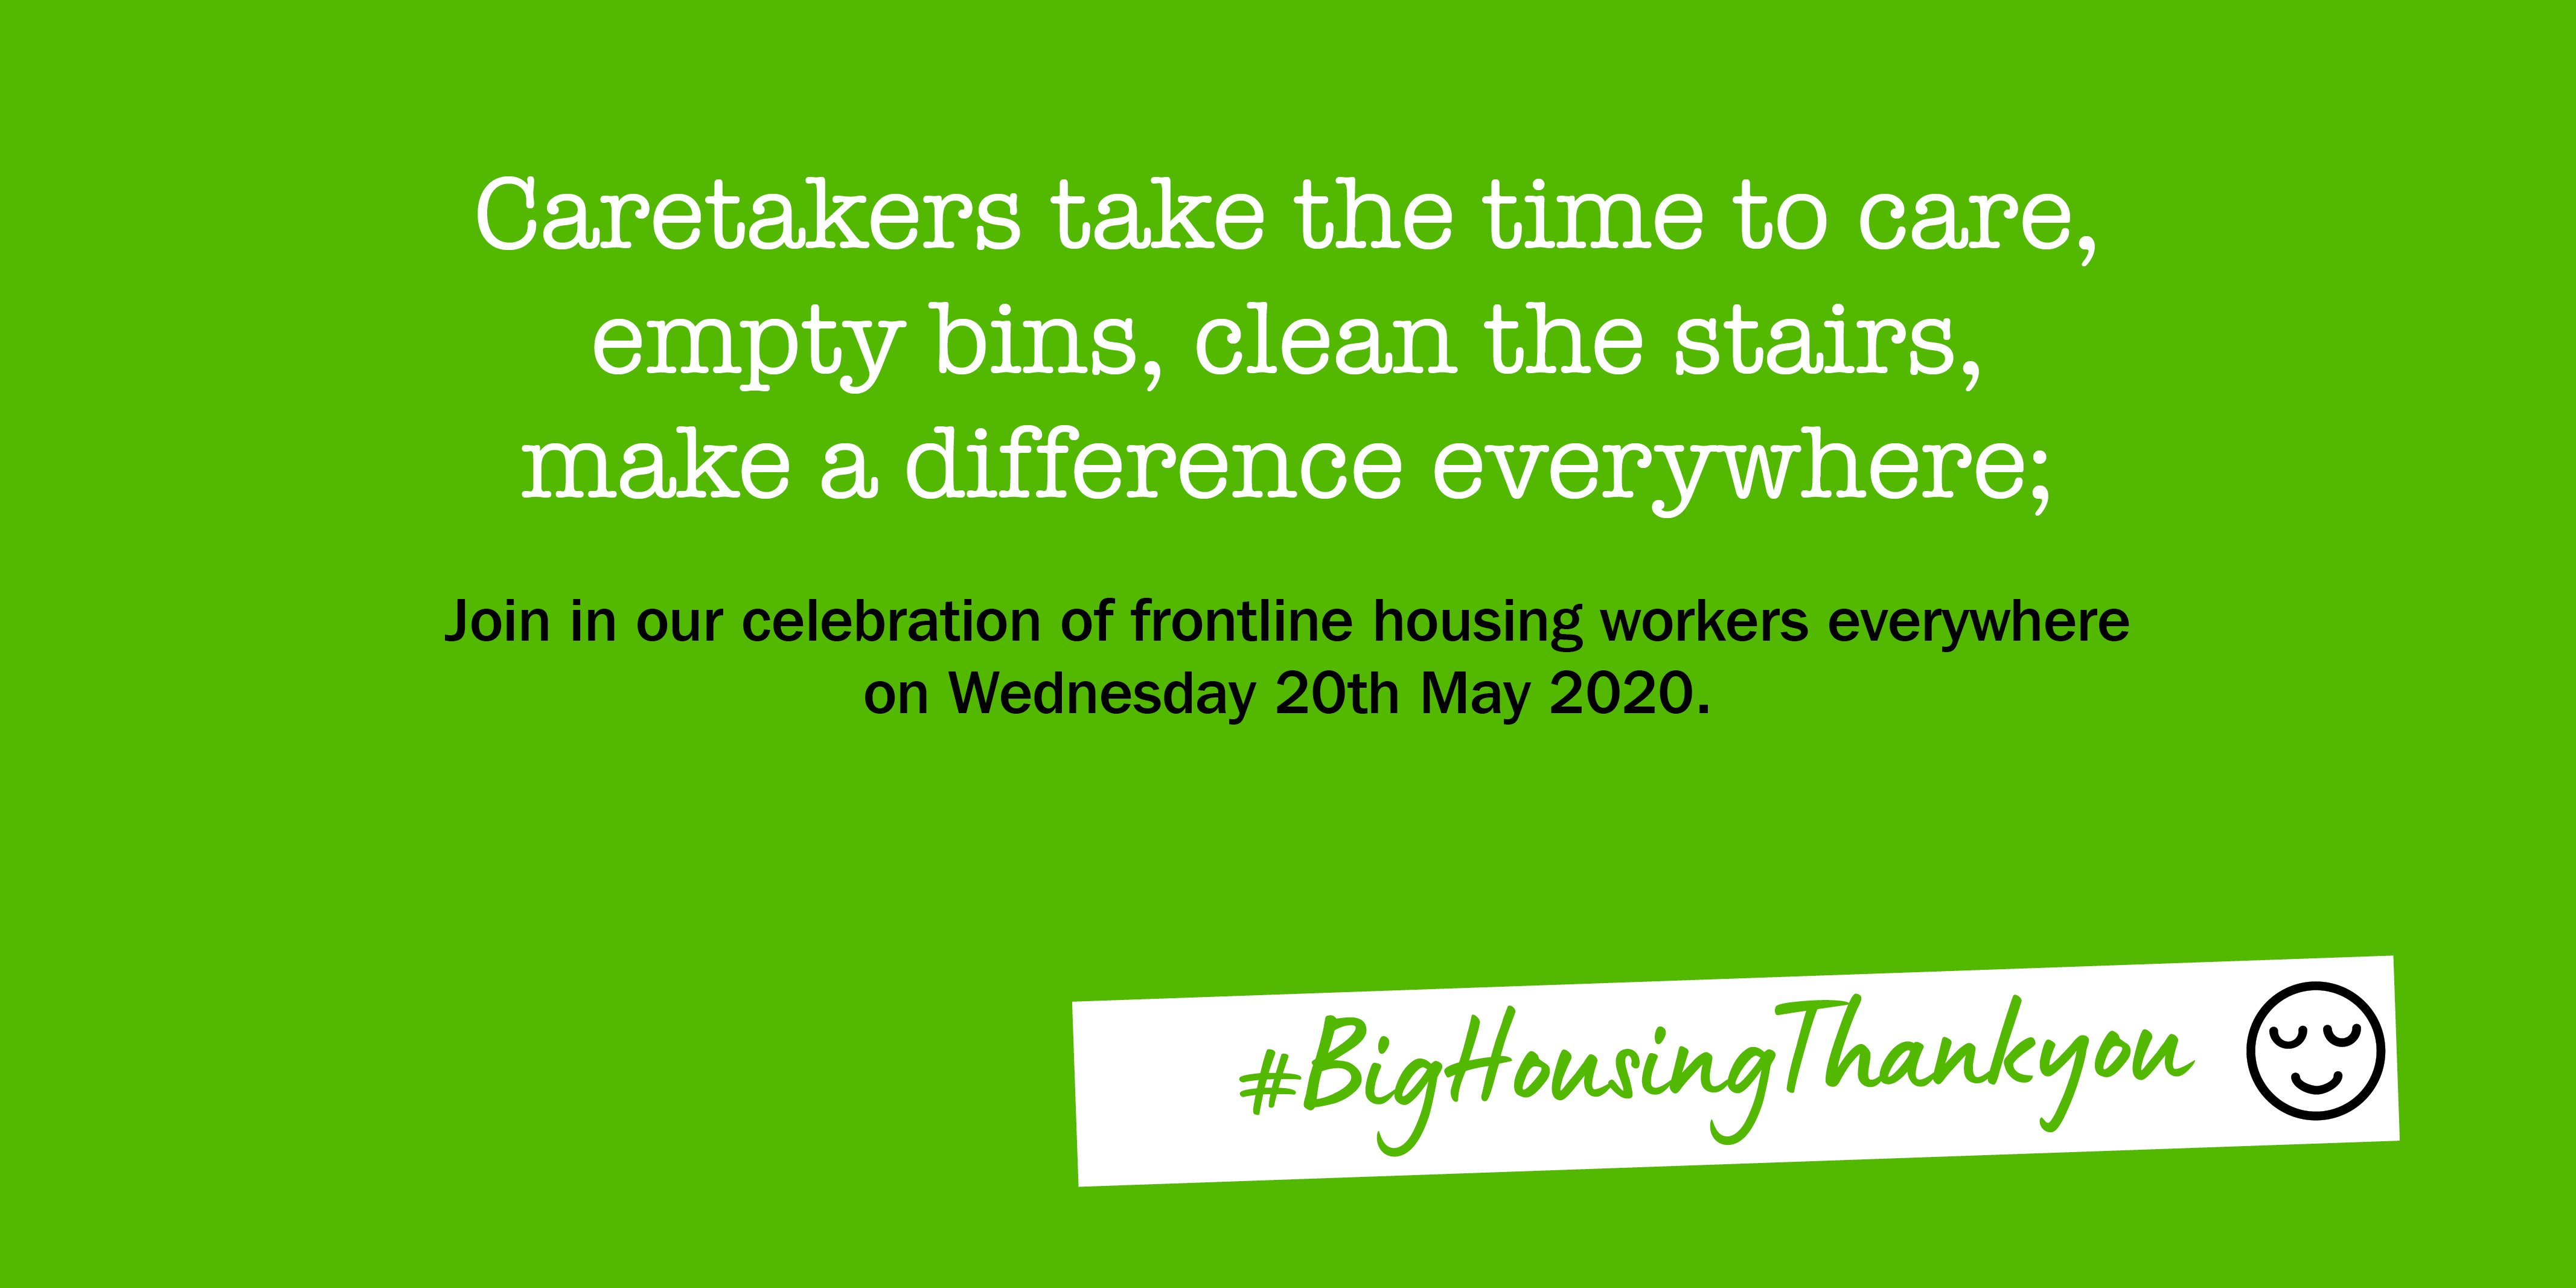 Caretakers take the time to care, empty bins, clean the stairs, make a difference everywhere